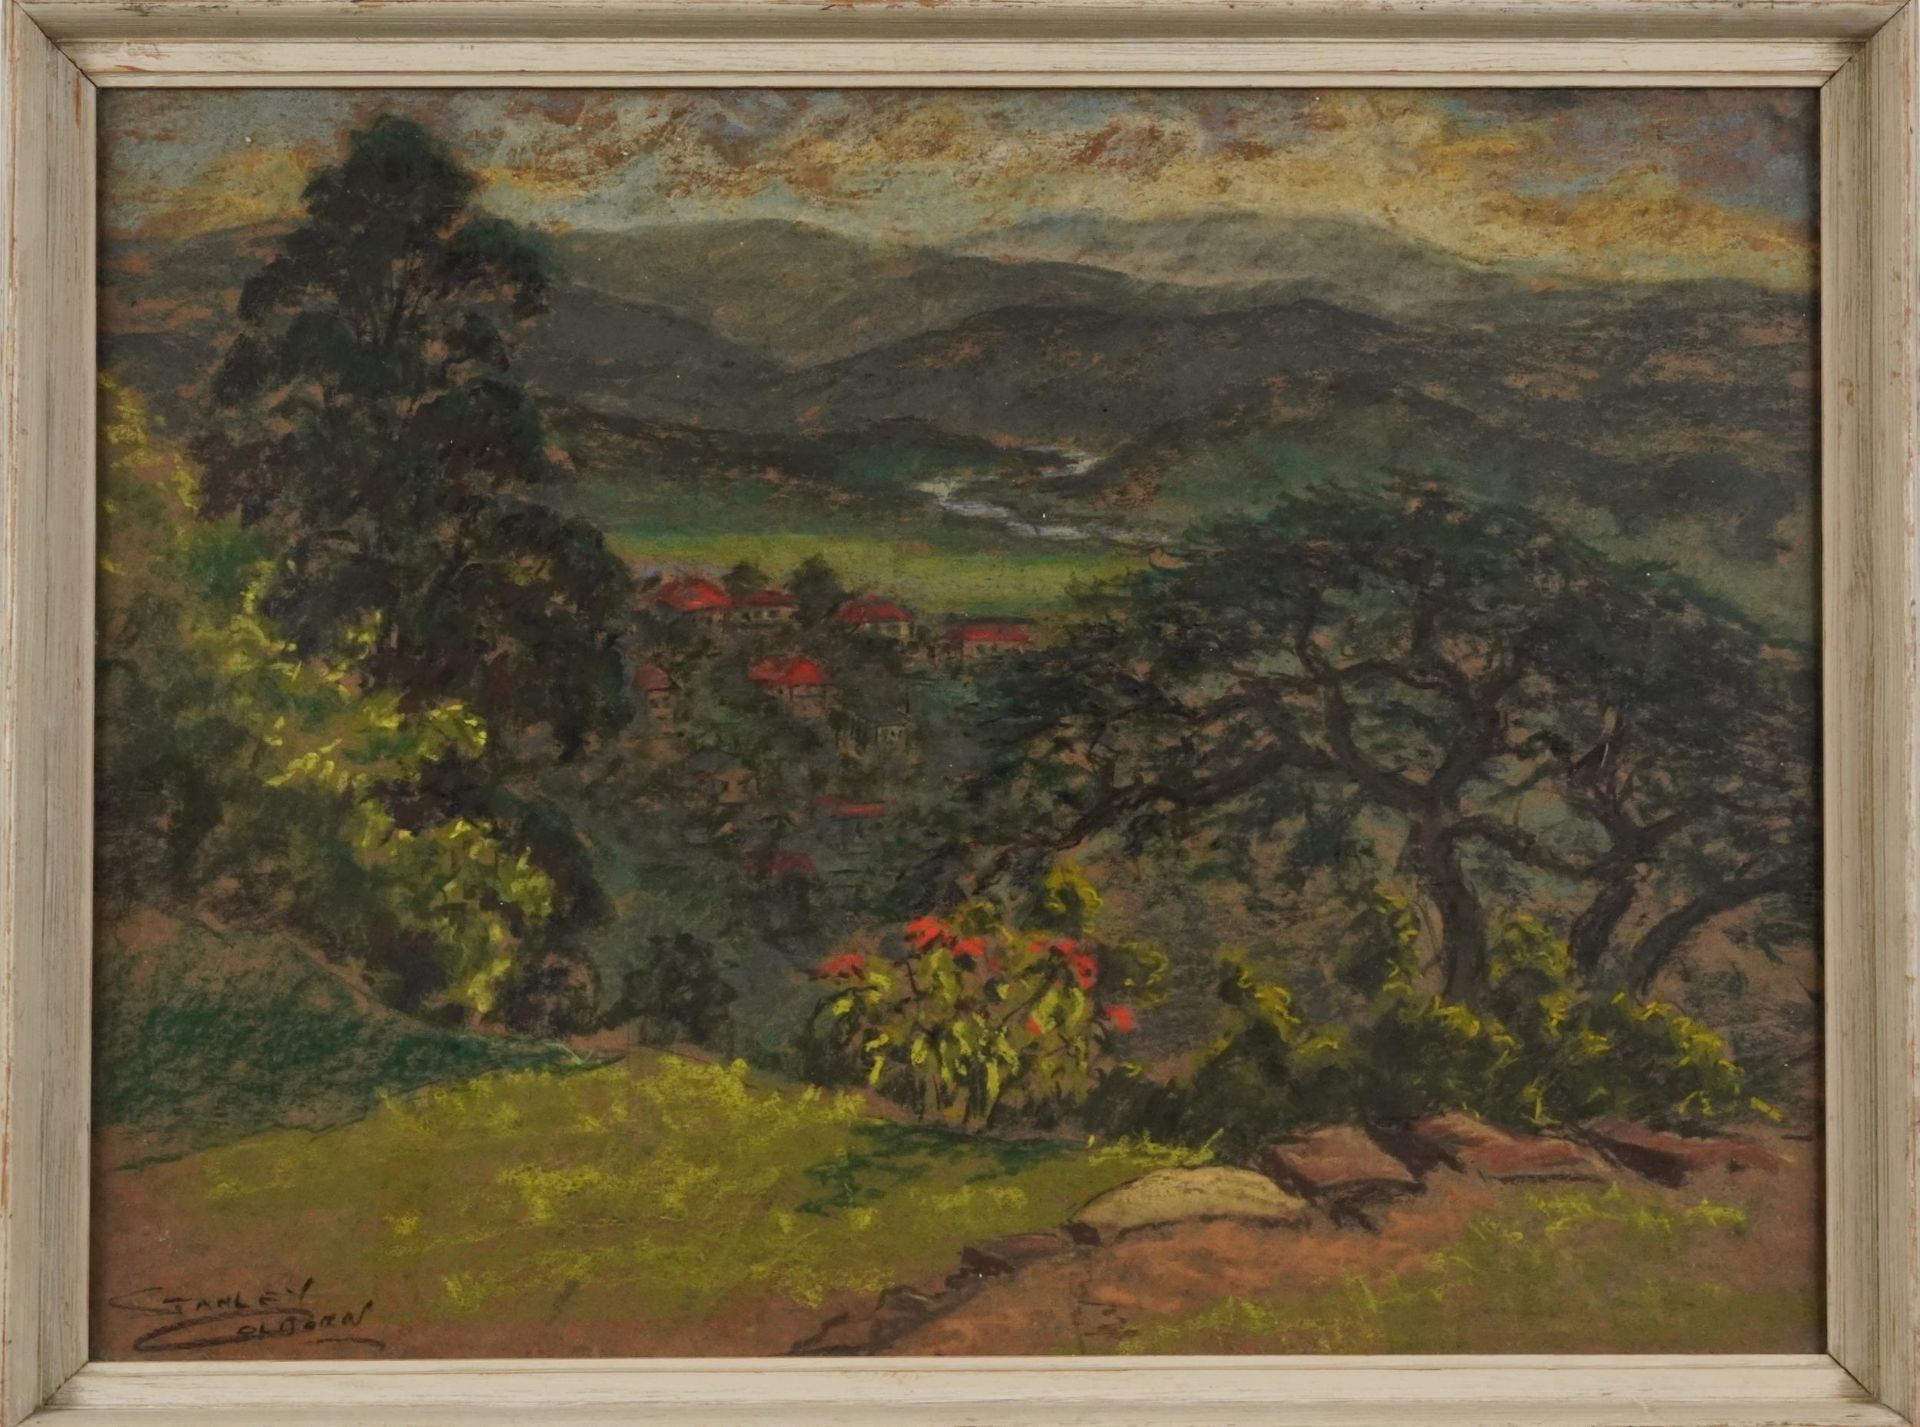 Stanley Colborn - Landscape with houses before mountains, pastel, framed and glazed, 56cm x 41cm - Image 2 of 4